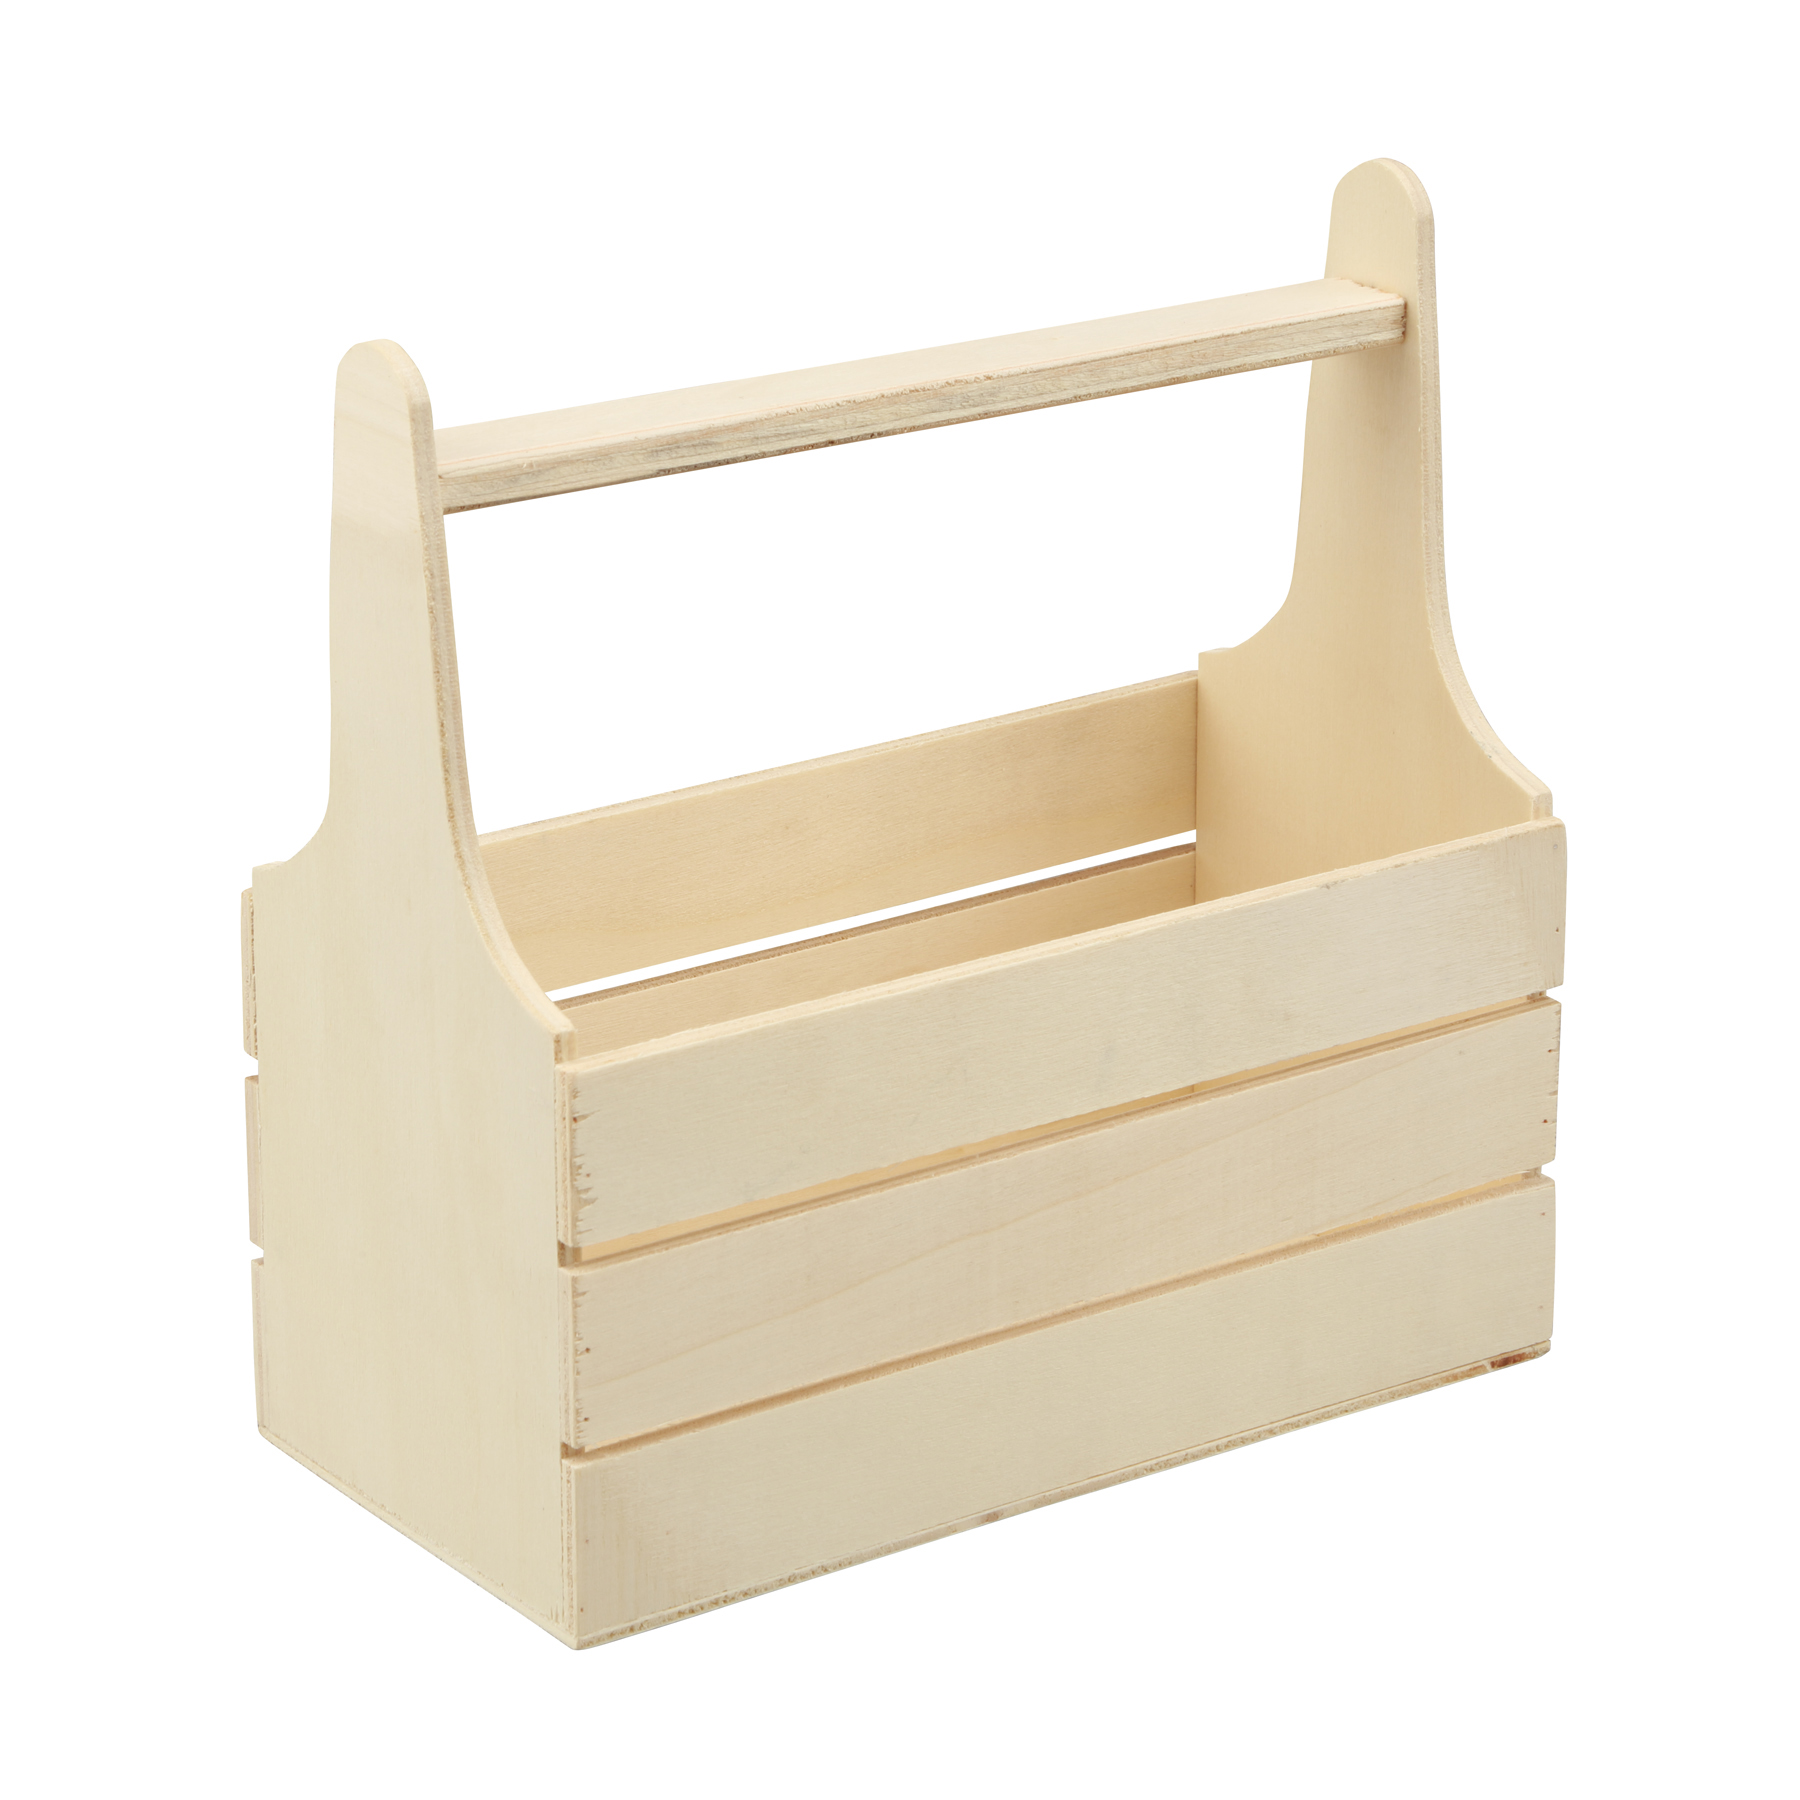 Find the Wood Tool Box by ArtMinds® at Michaels